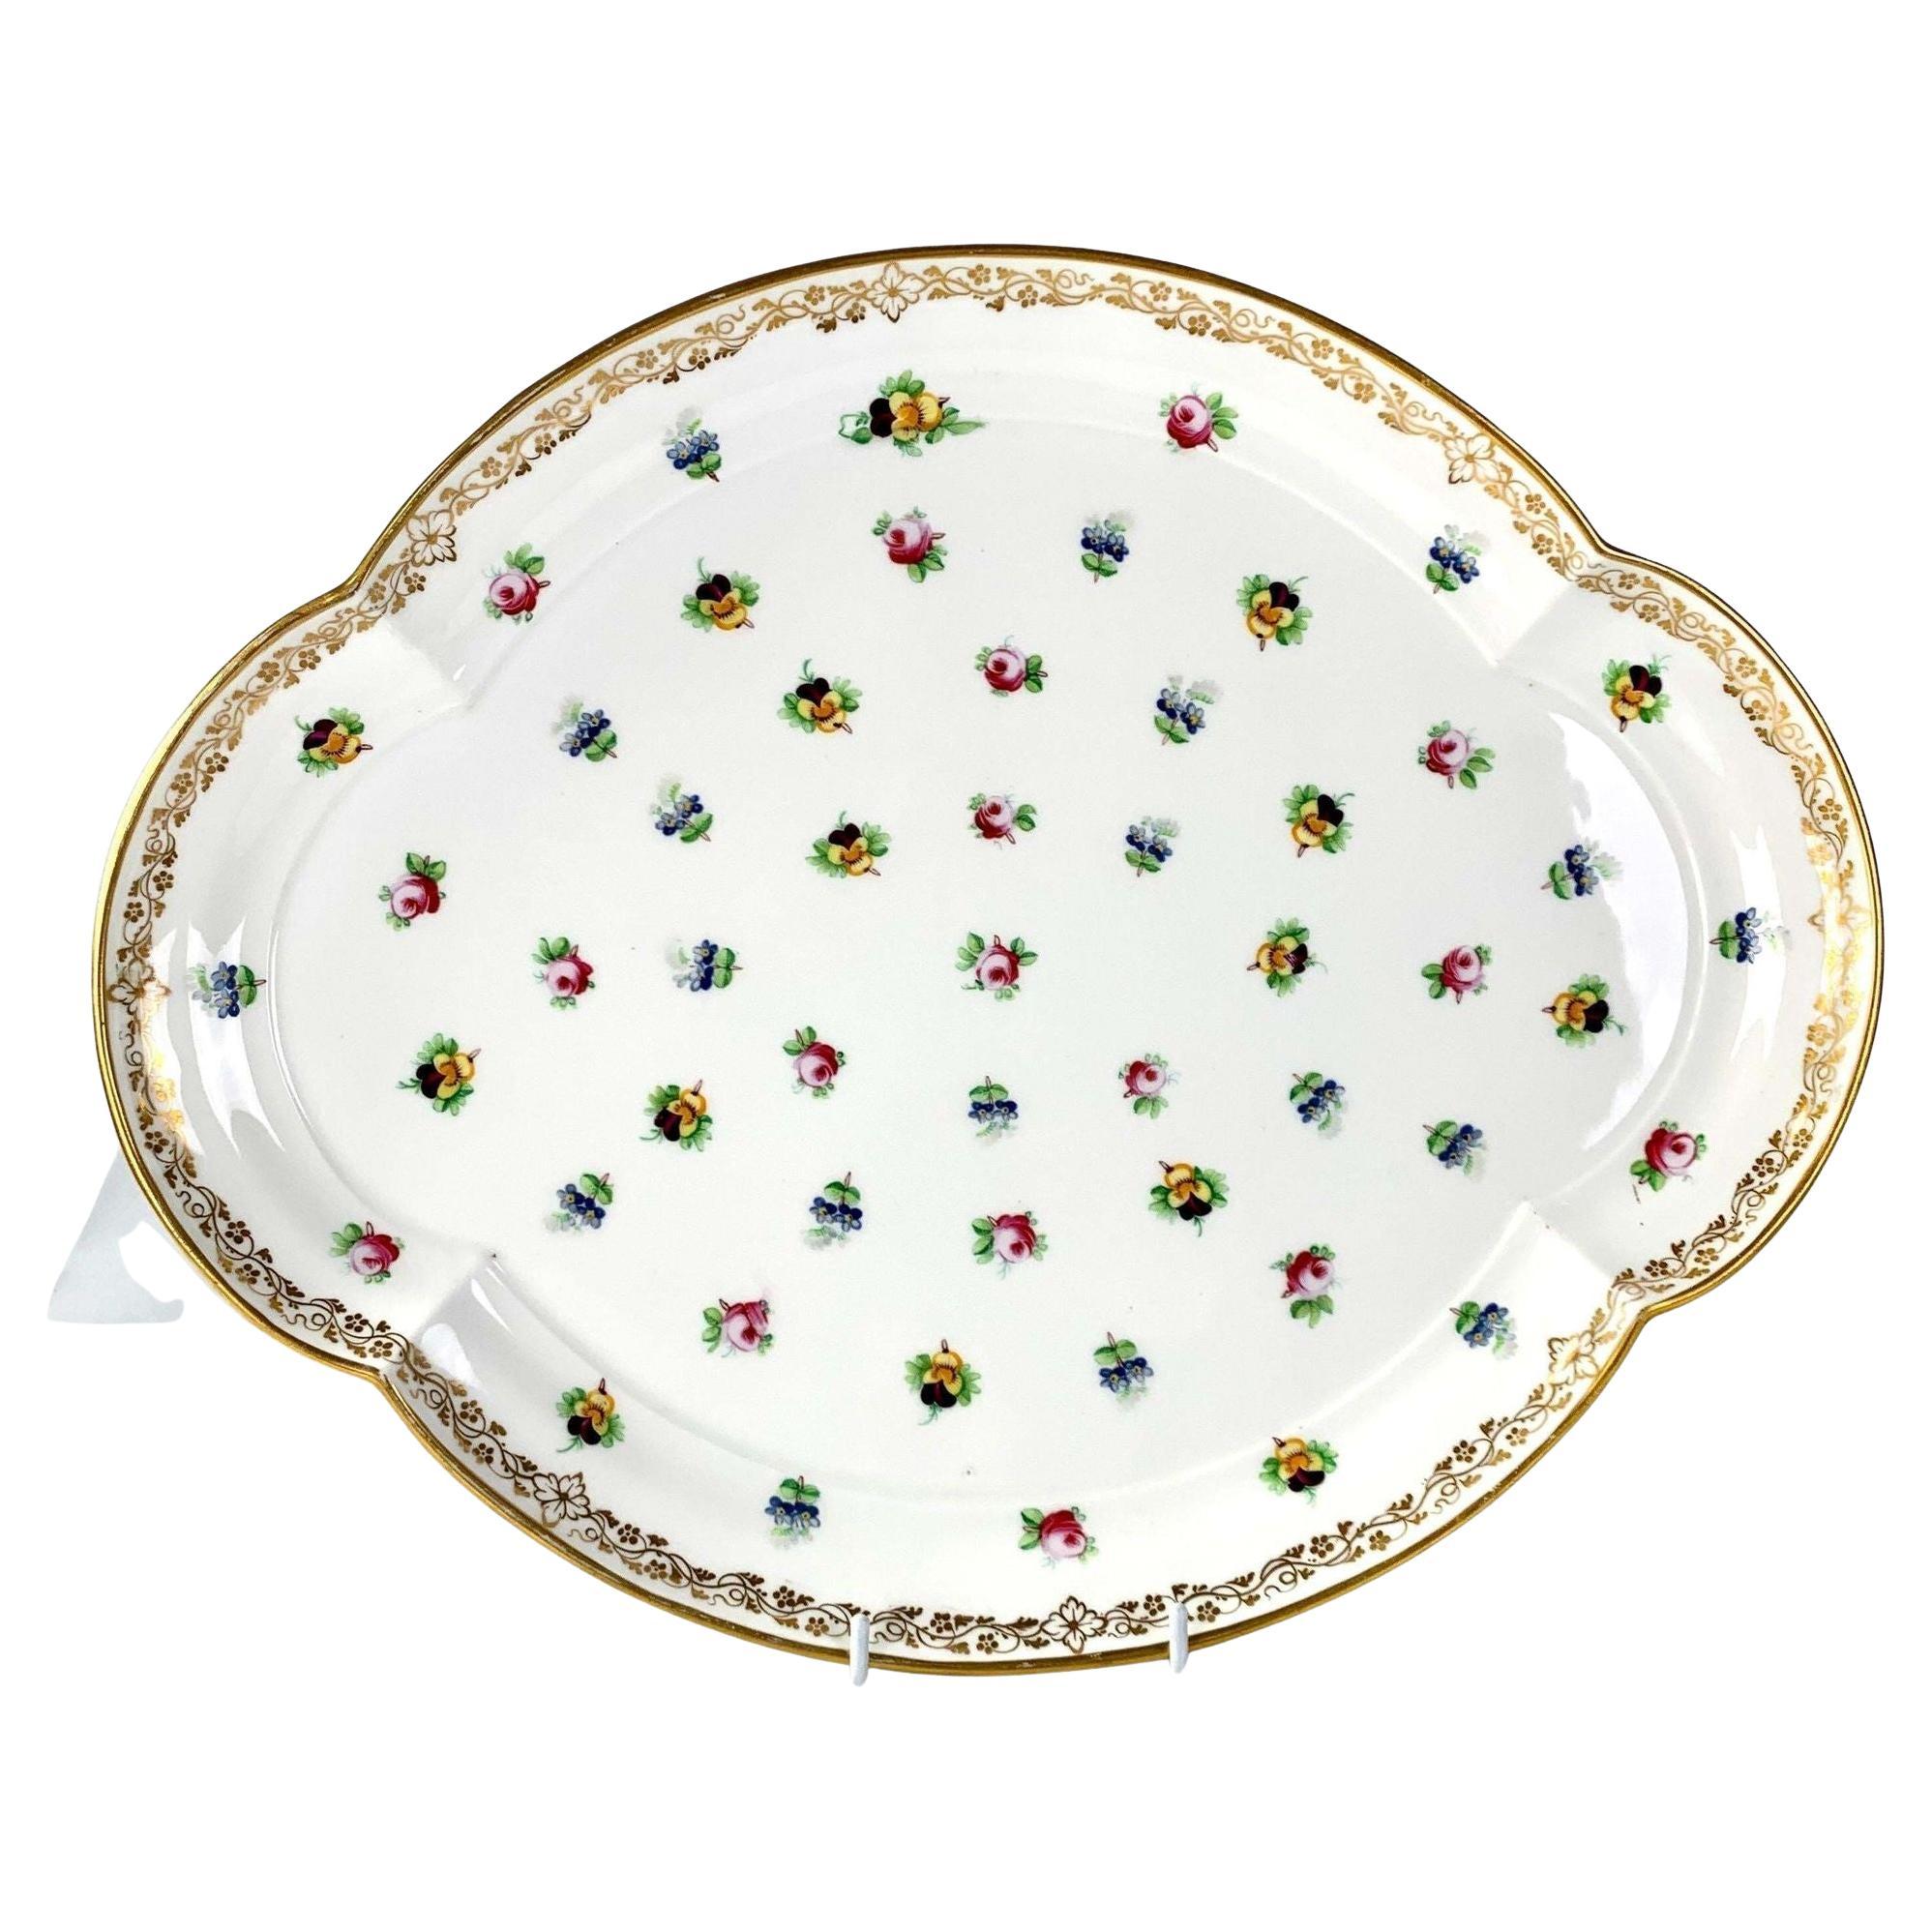 Minton Platter England Mid-19th Century Decorated Roses Pansies Forget Me Nots